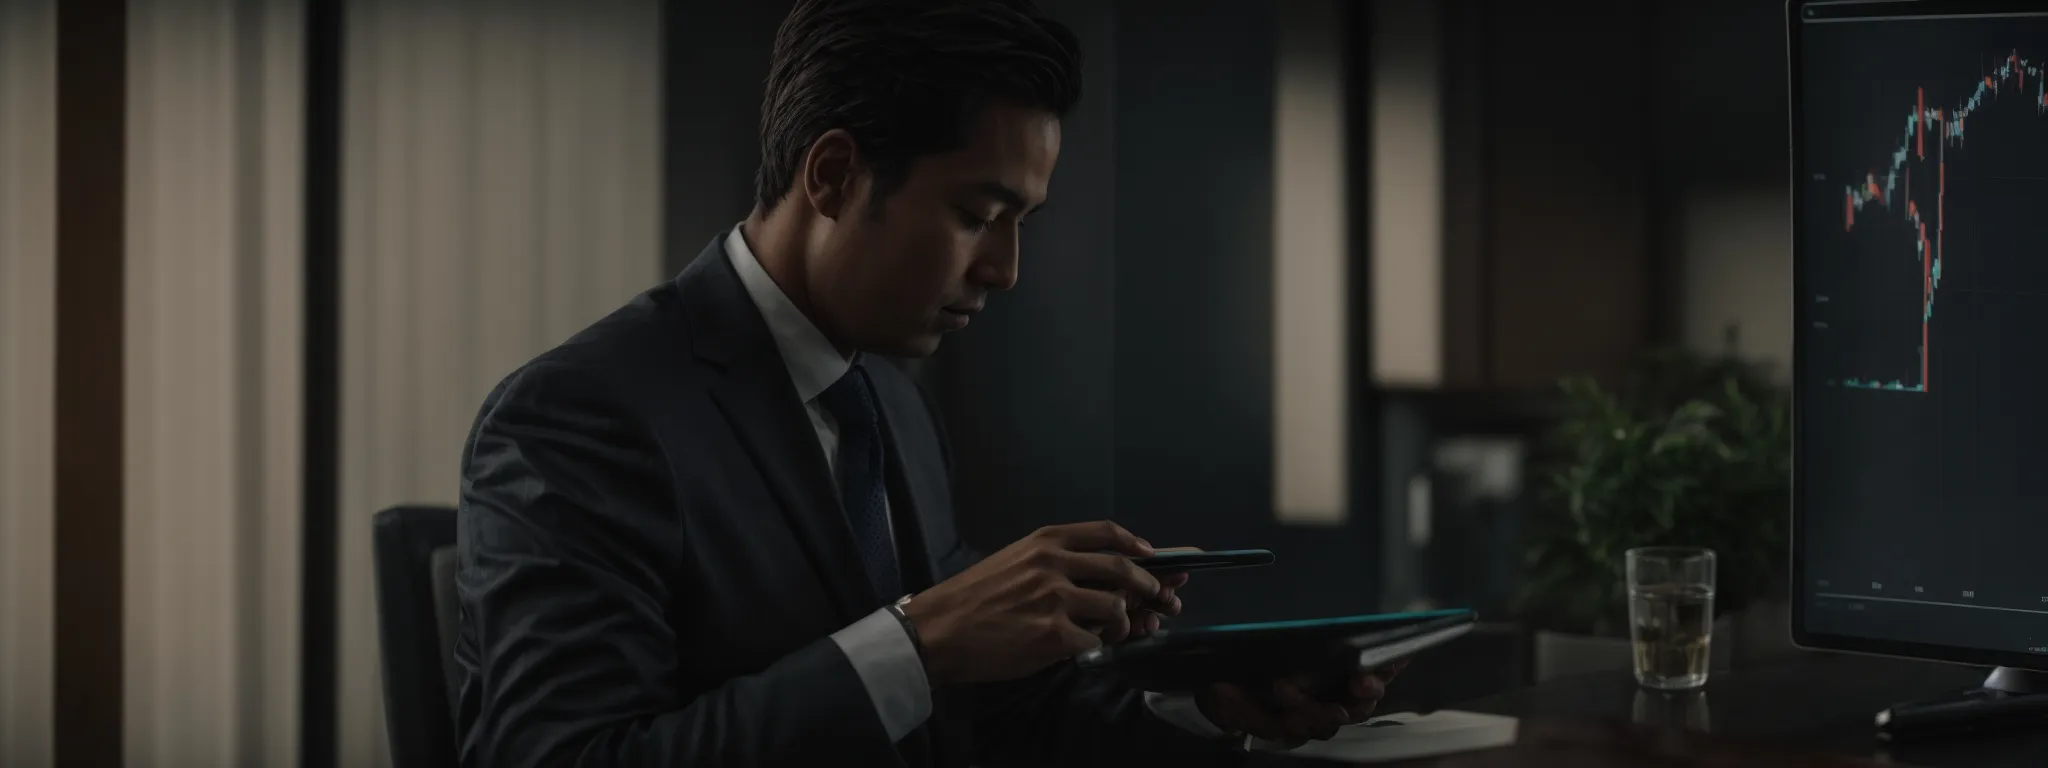 a businessman studies a graph on a digital tablet indicating growth trends in a modern office setting.